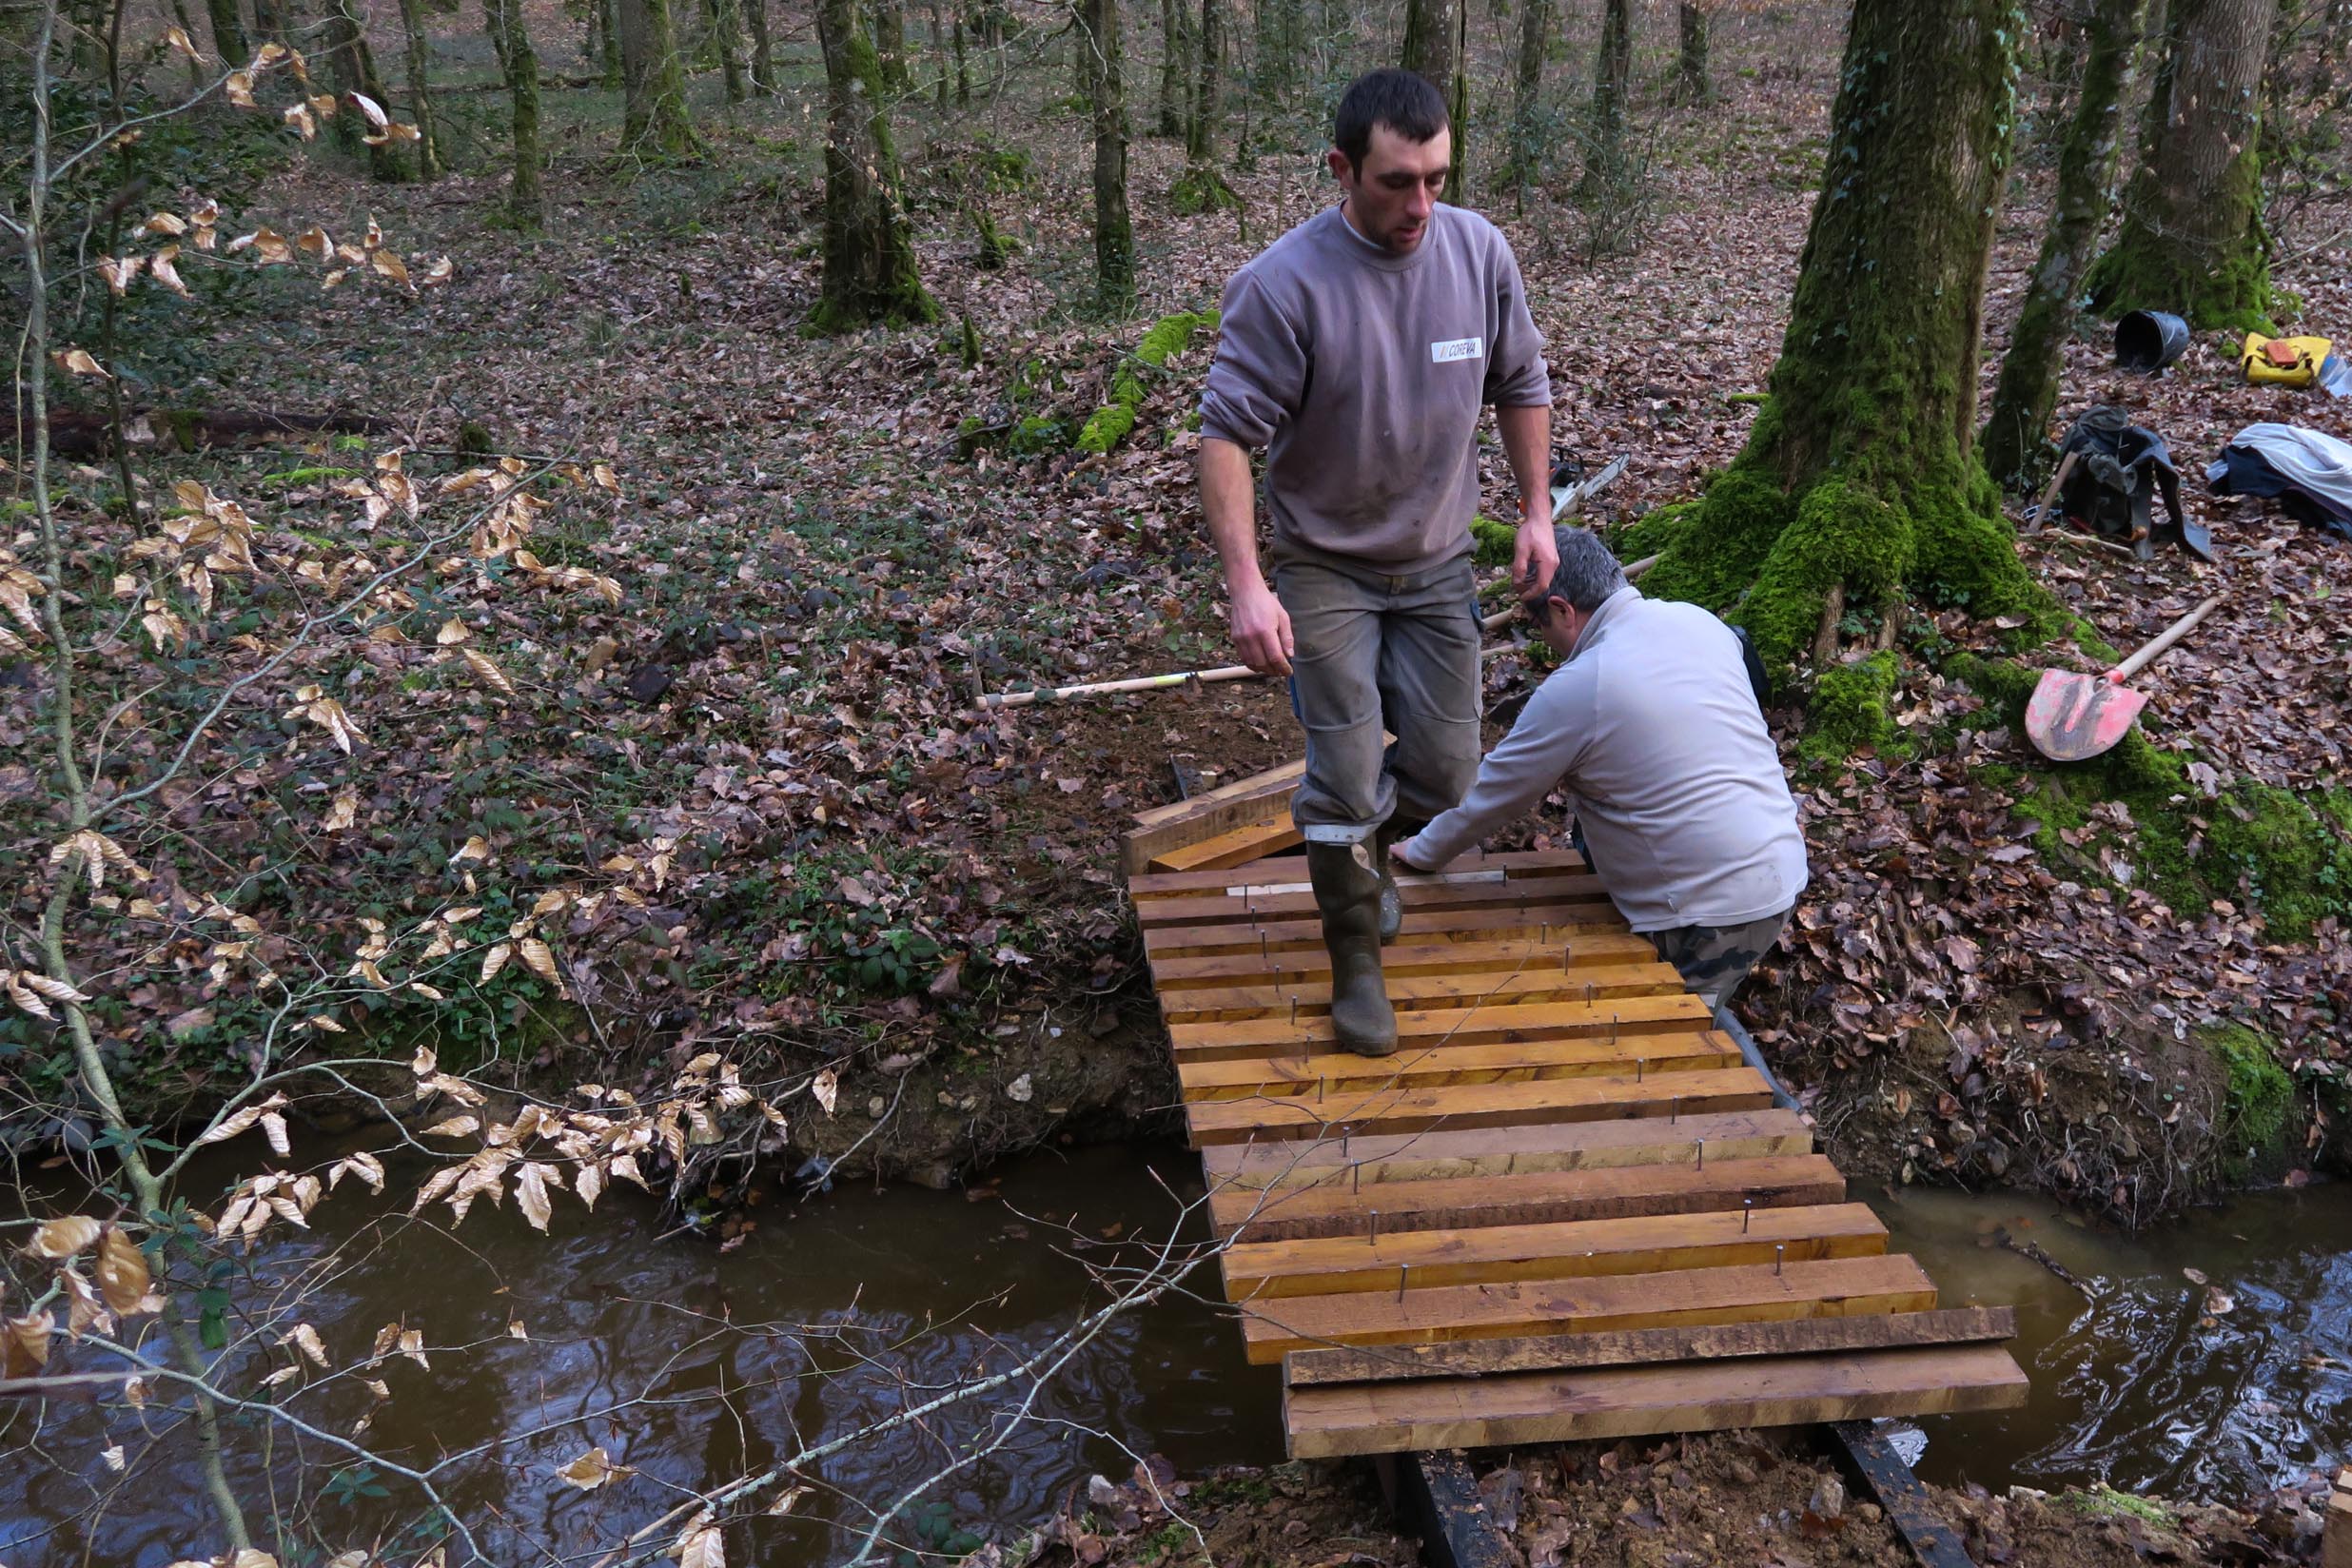 2018-03-10 Fabrication passerelle forêt Rennes-4